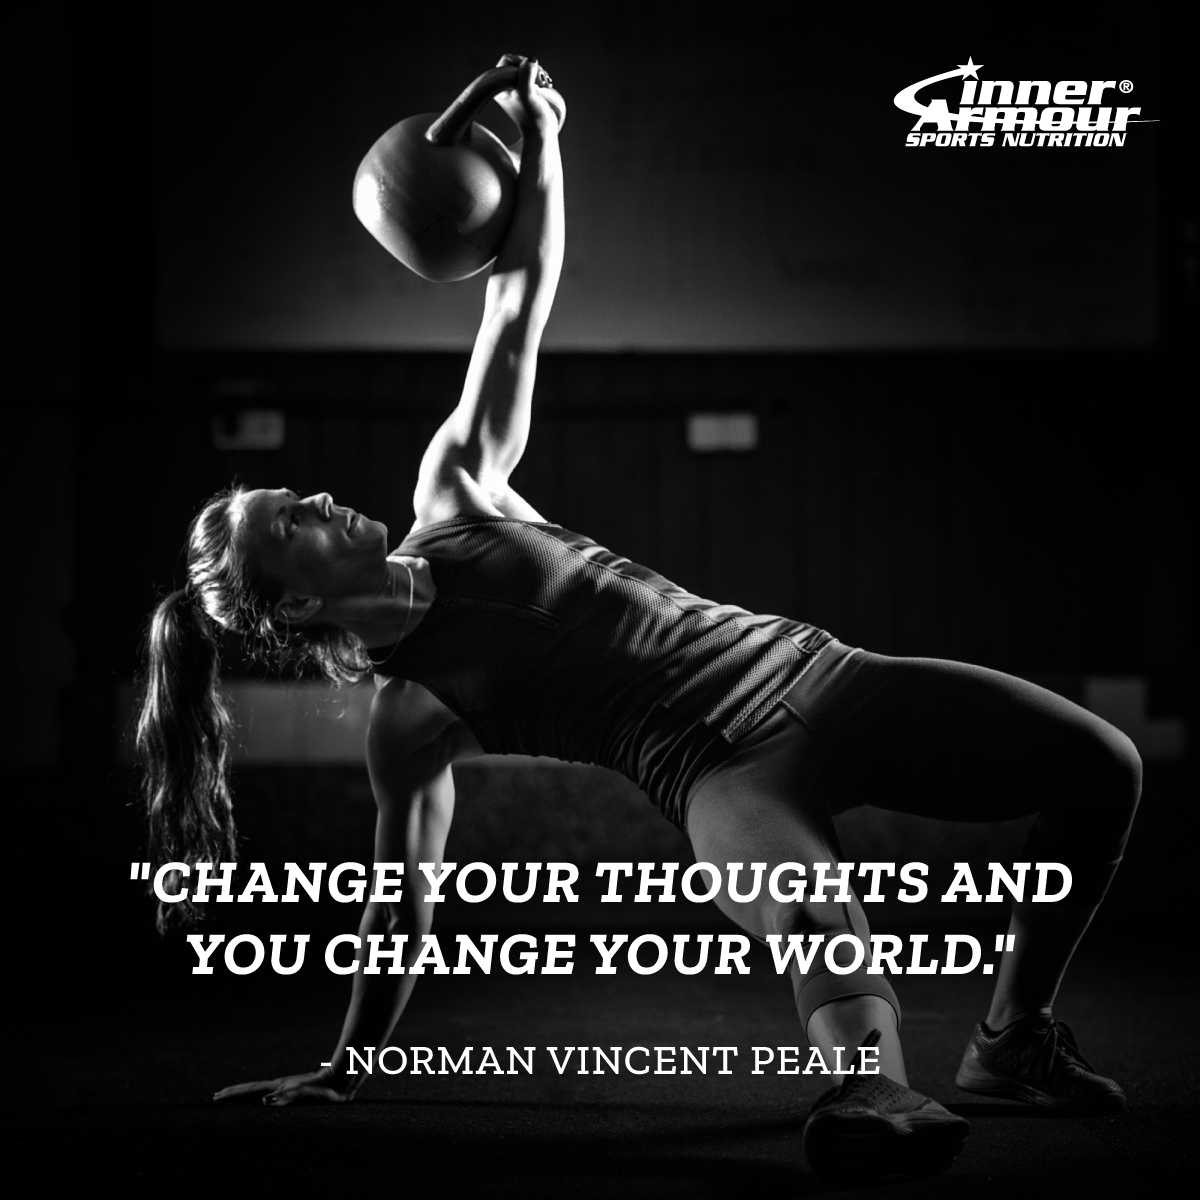 Change your thoughts and you change your world. - Norman Vincent Peale #InnerArmour #StrengthFromWithin #indisputableresults#sportsnutrition